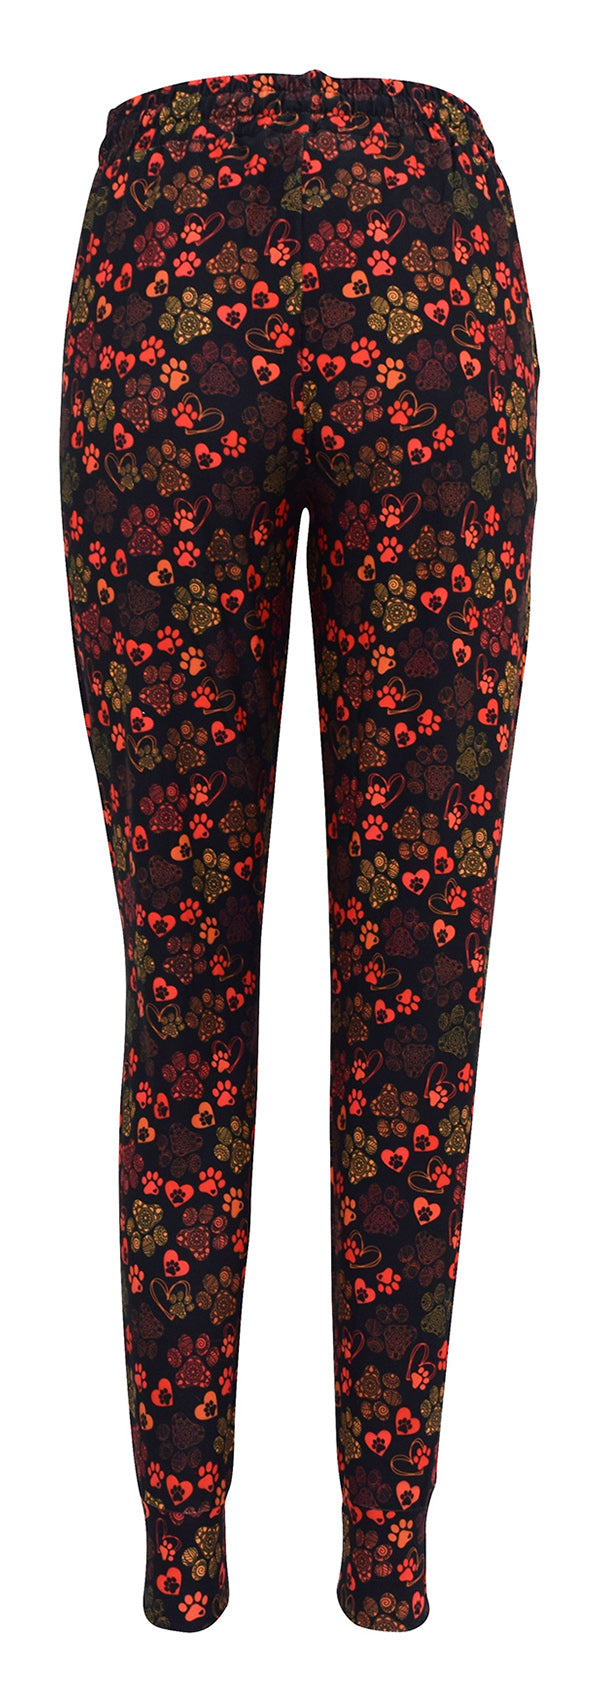 Woodland Paws Lejoggers-Joggers